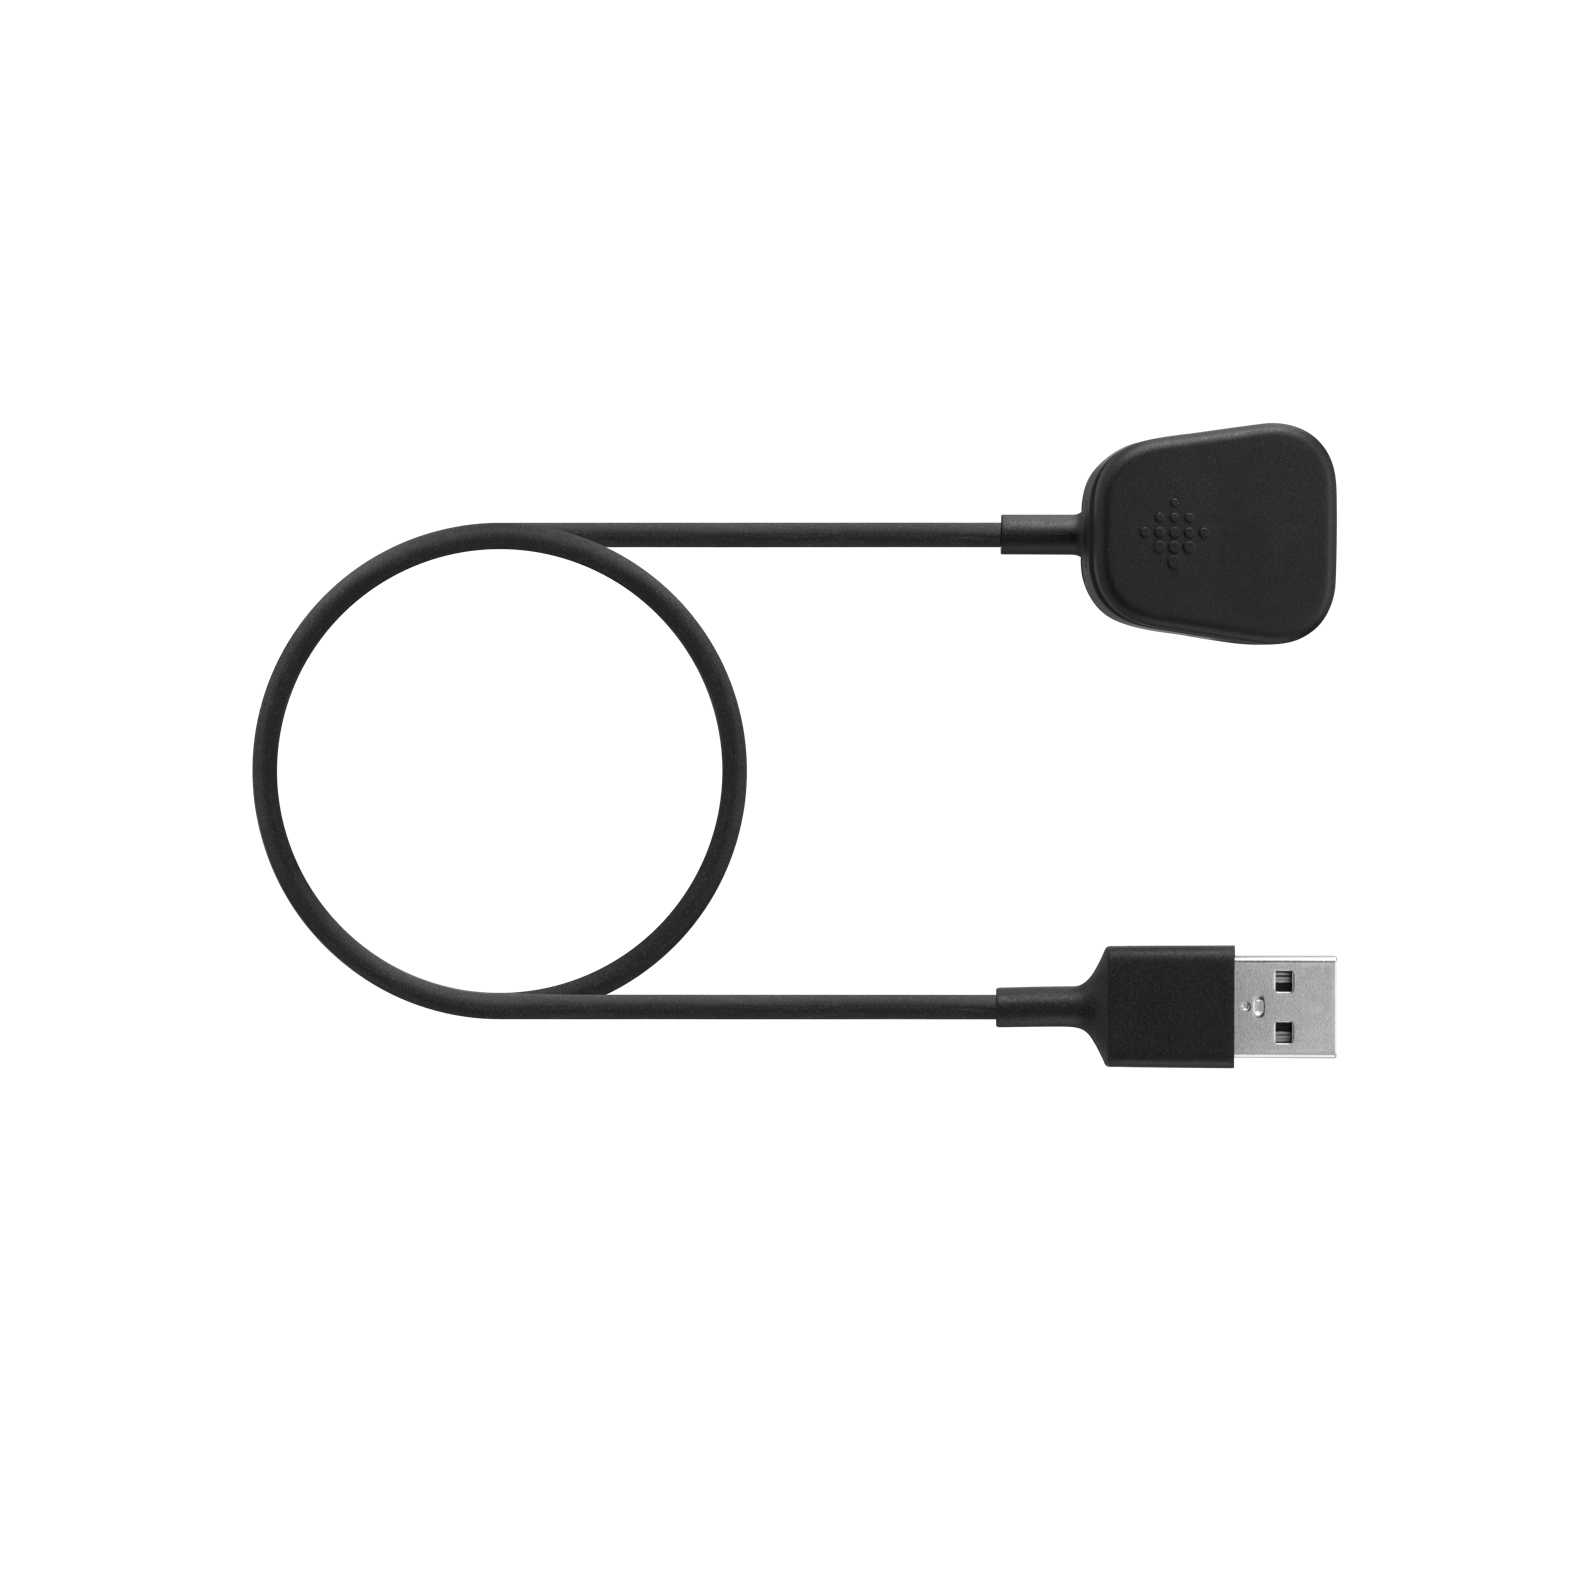 charge 3 charging cable